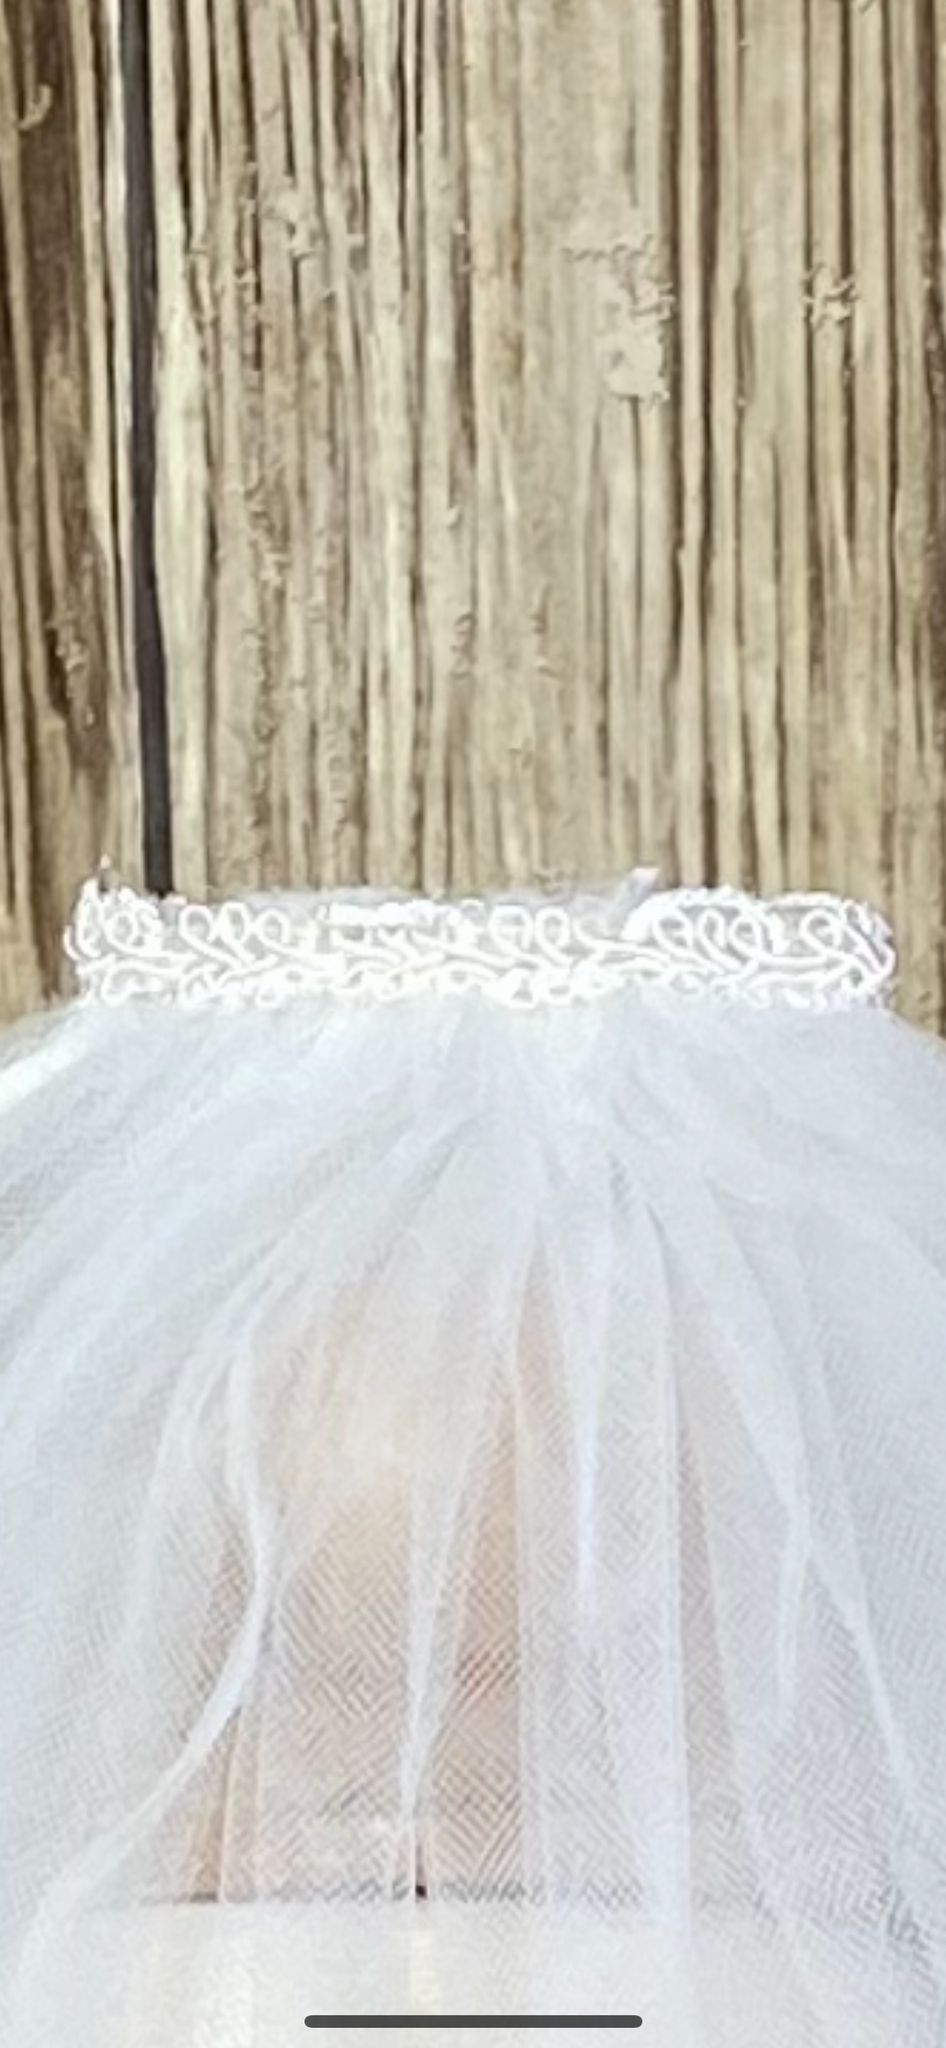  Ivory - Classic Veil for First Communion   Elegant soft 2 layer tulle veil with delicate hand stitched braided satin trim around the edge.  Veil length - 22 in. long  Handmade halo ivory lace crown with comb (2 in. wide to secure in place).  Materials:  sturdy plastic comb and soft tulle.